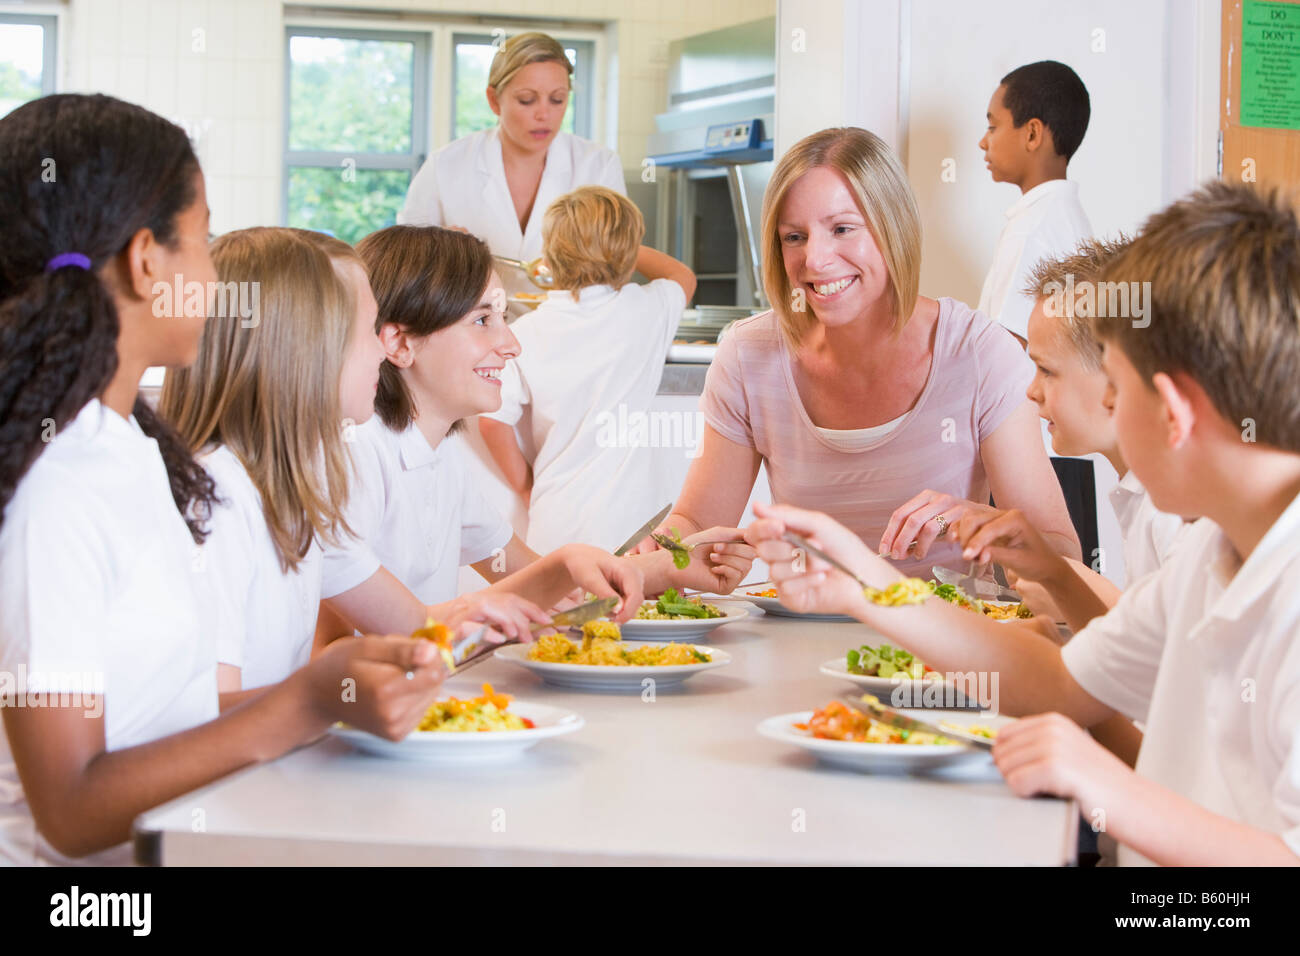 Students sitting at cafeteria table eating lunch with teacher Stock Photo